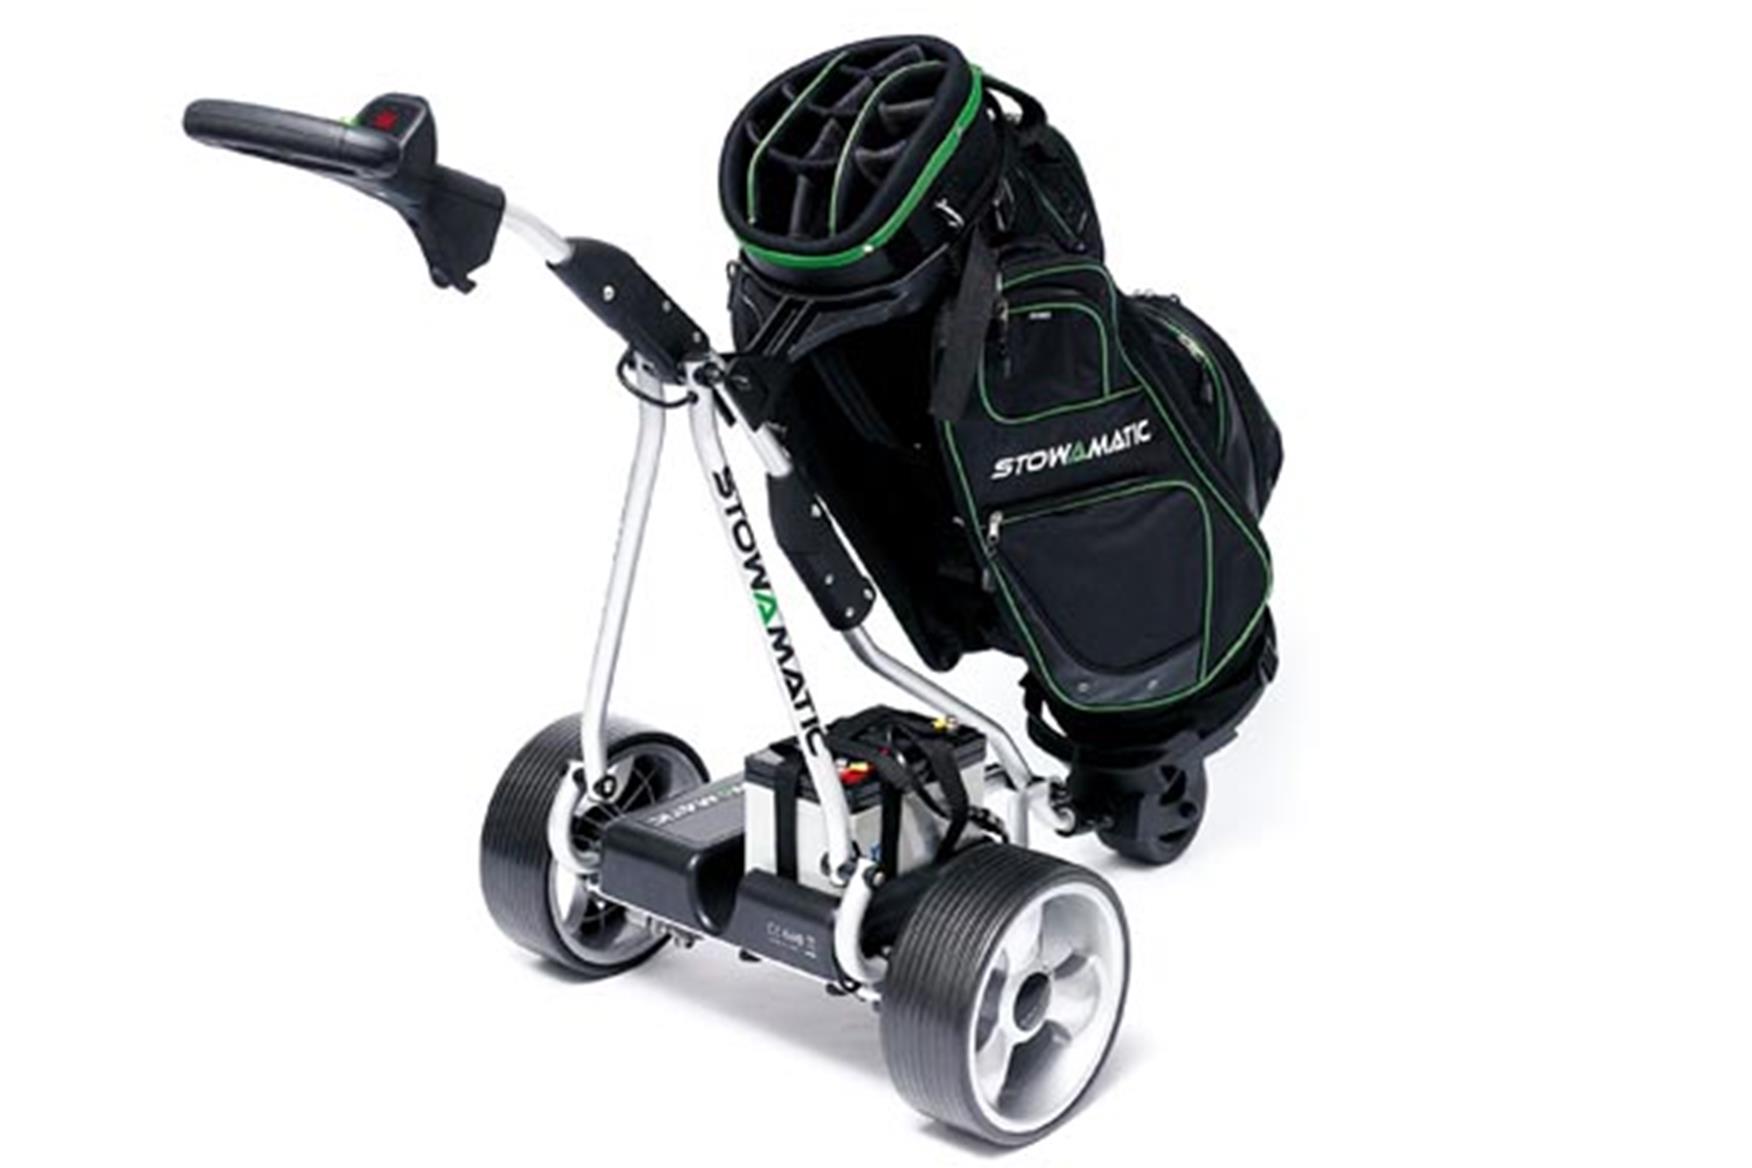 Stowamatic GT2 Electric Trolley Review | Equipment Reviews | Today's Golfer